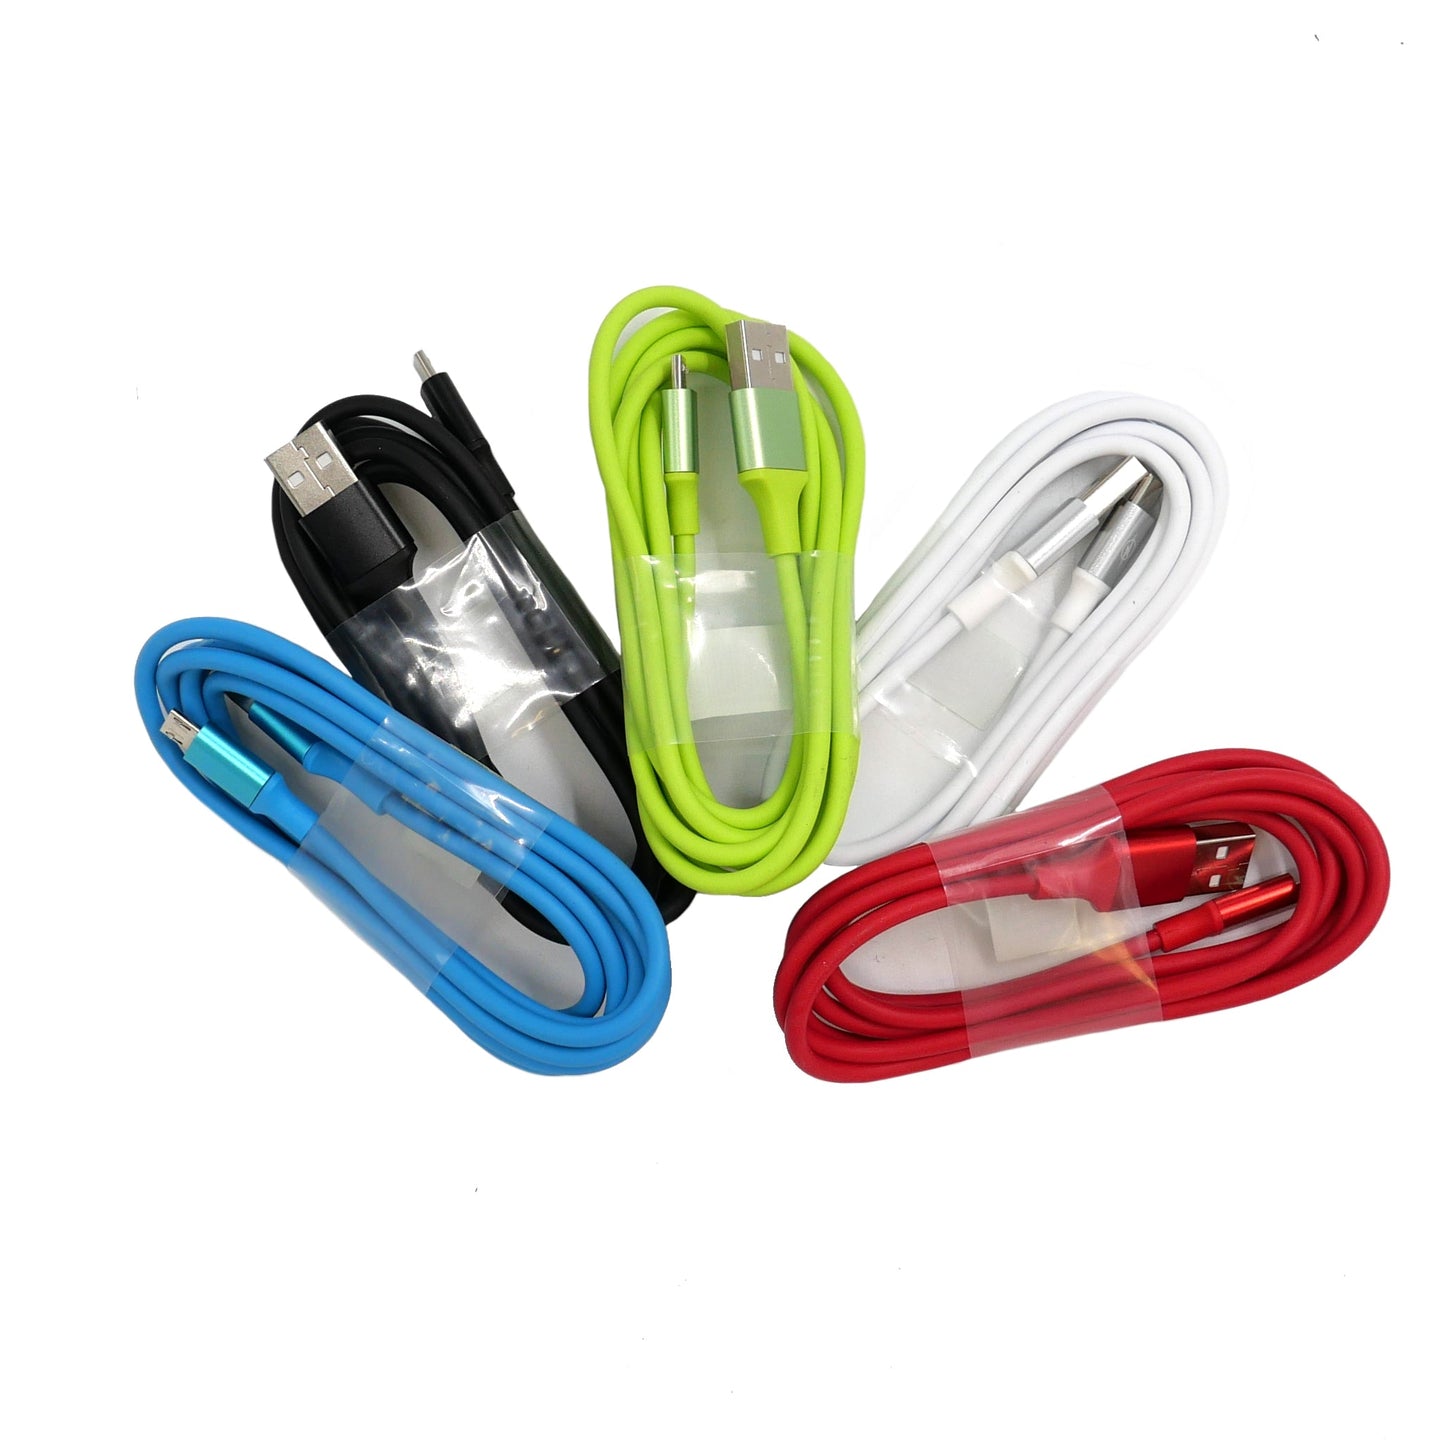 New Colorful - 1.5M iPhone USB Cables Ace Trading Canada